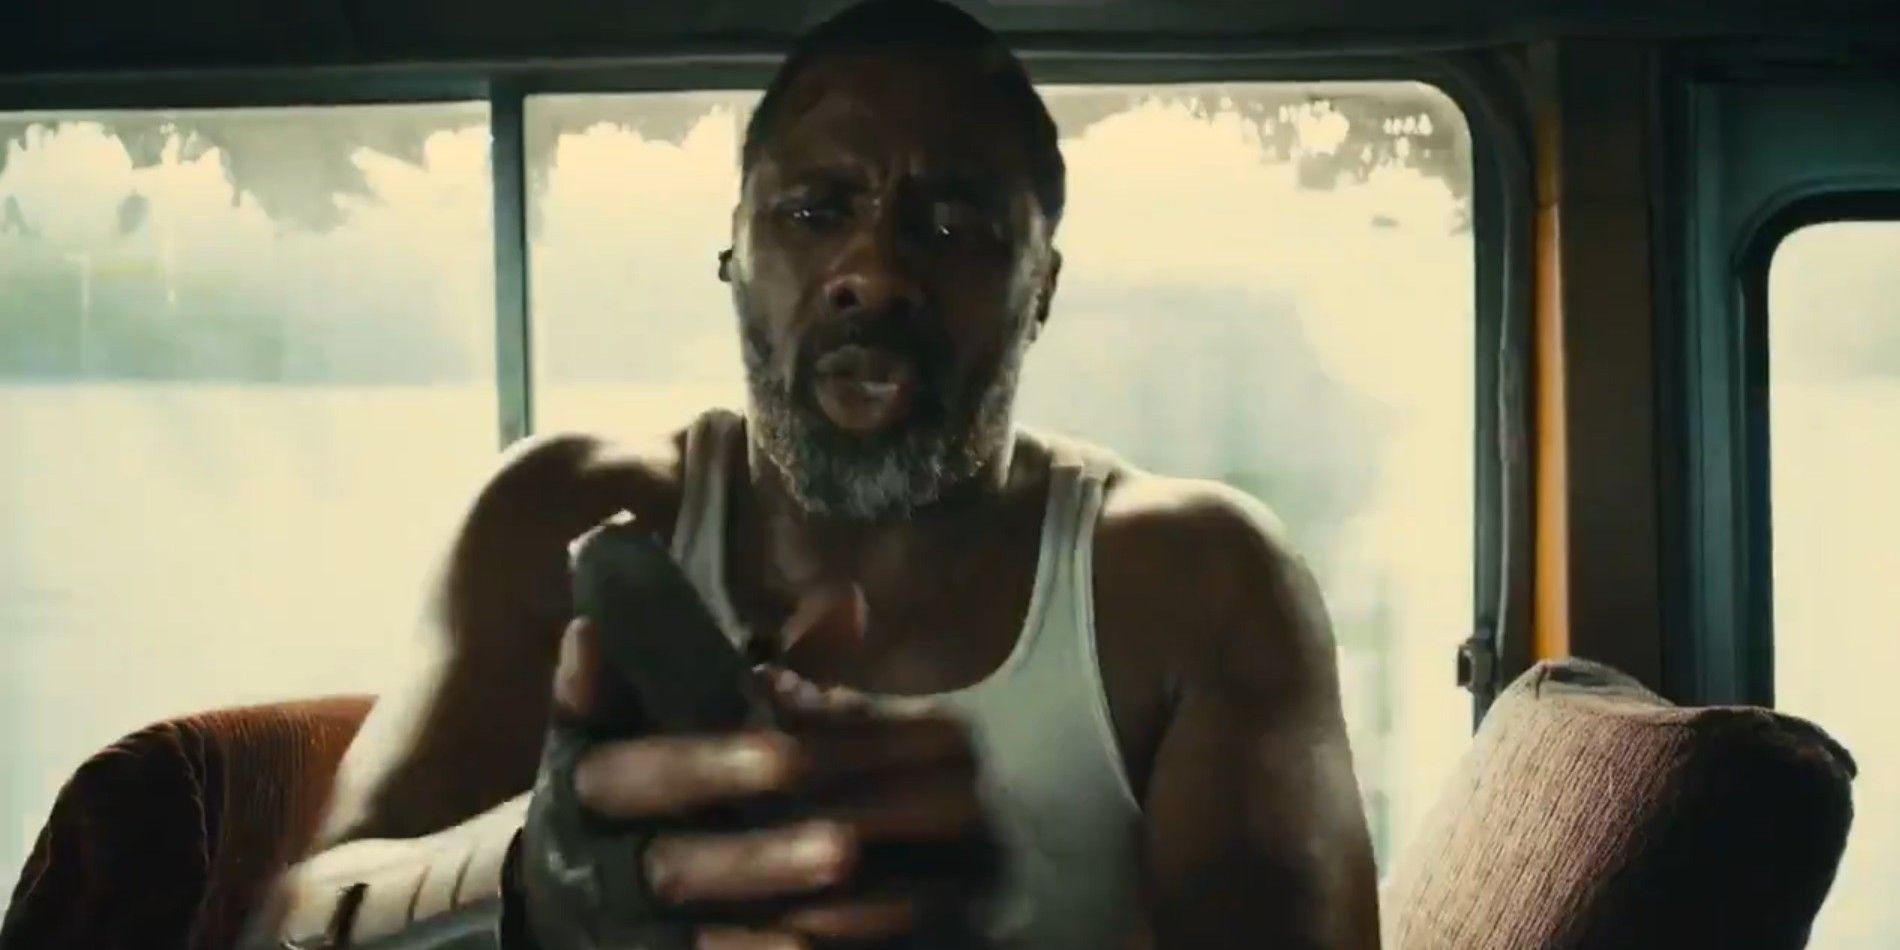 Idris Elba as Bloodsport in The Suicide Squad vertical